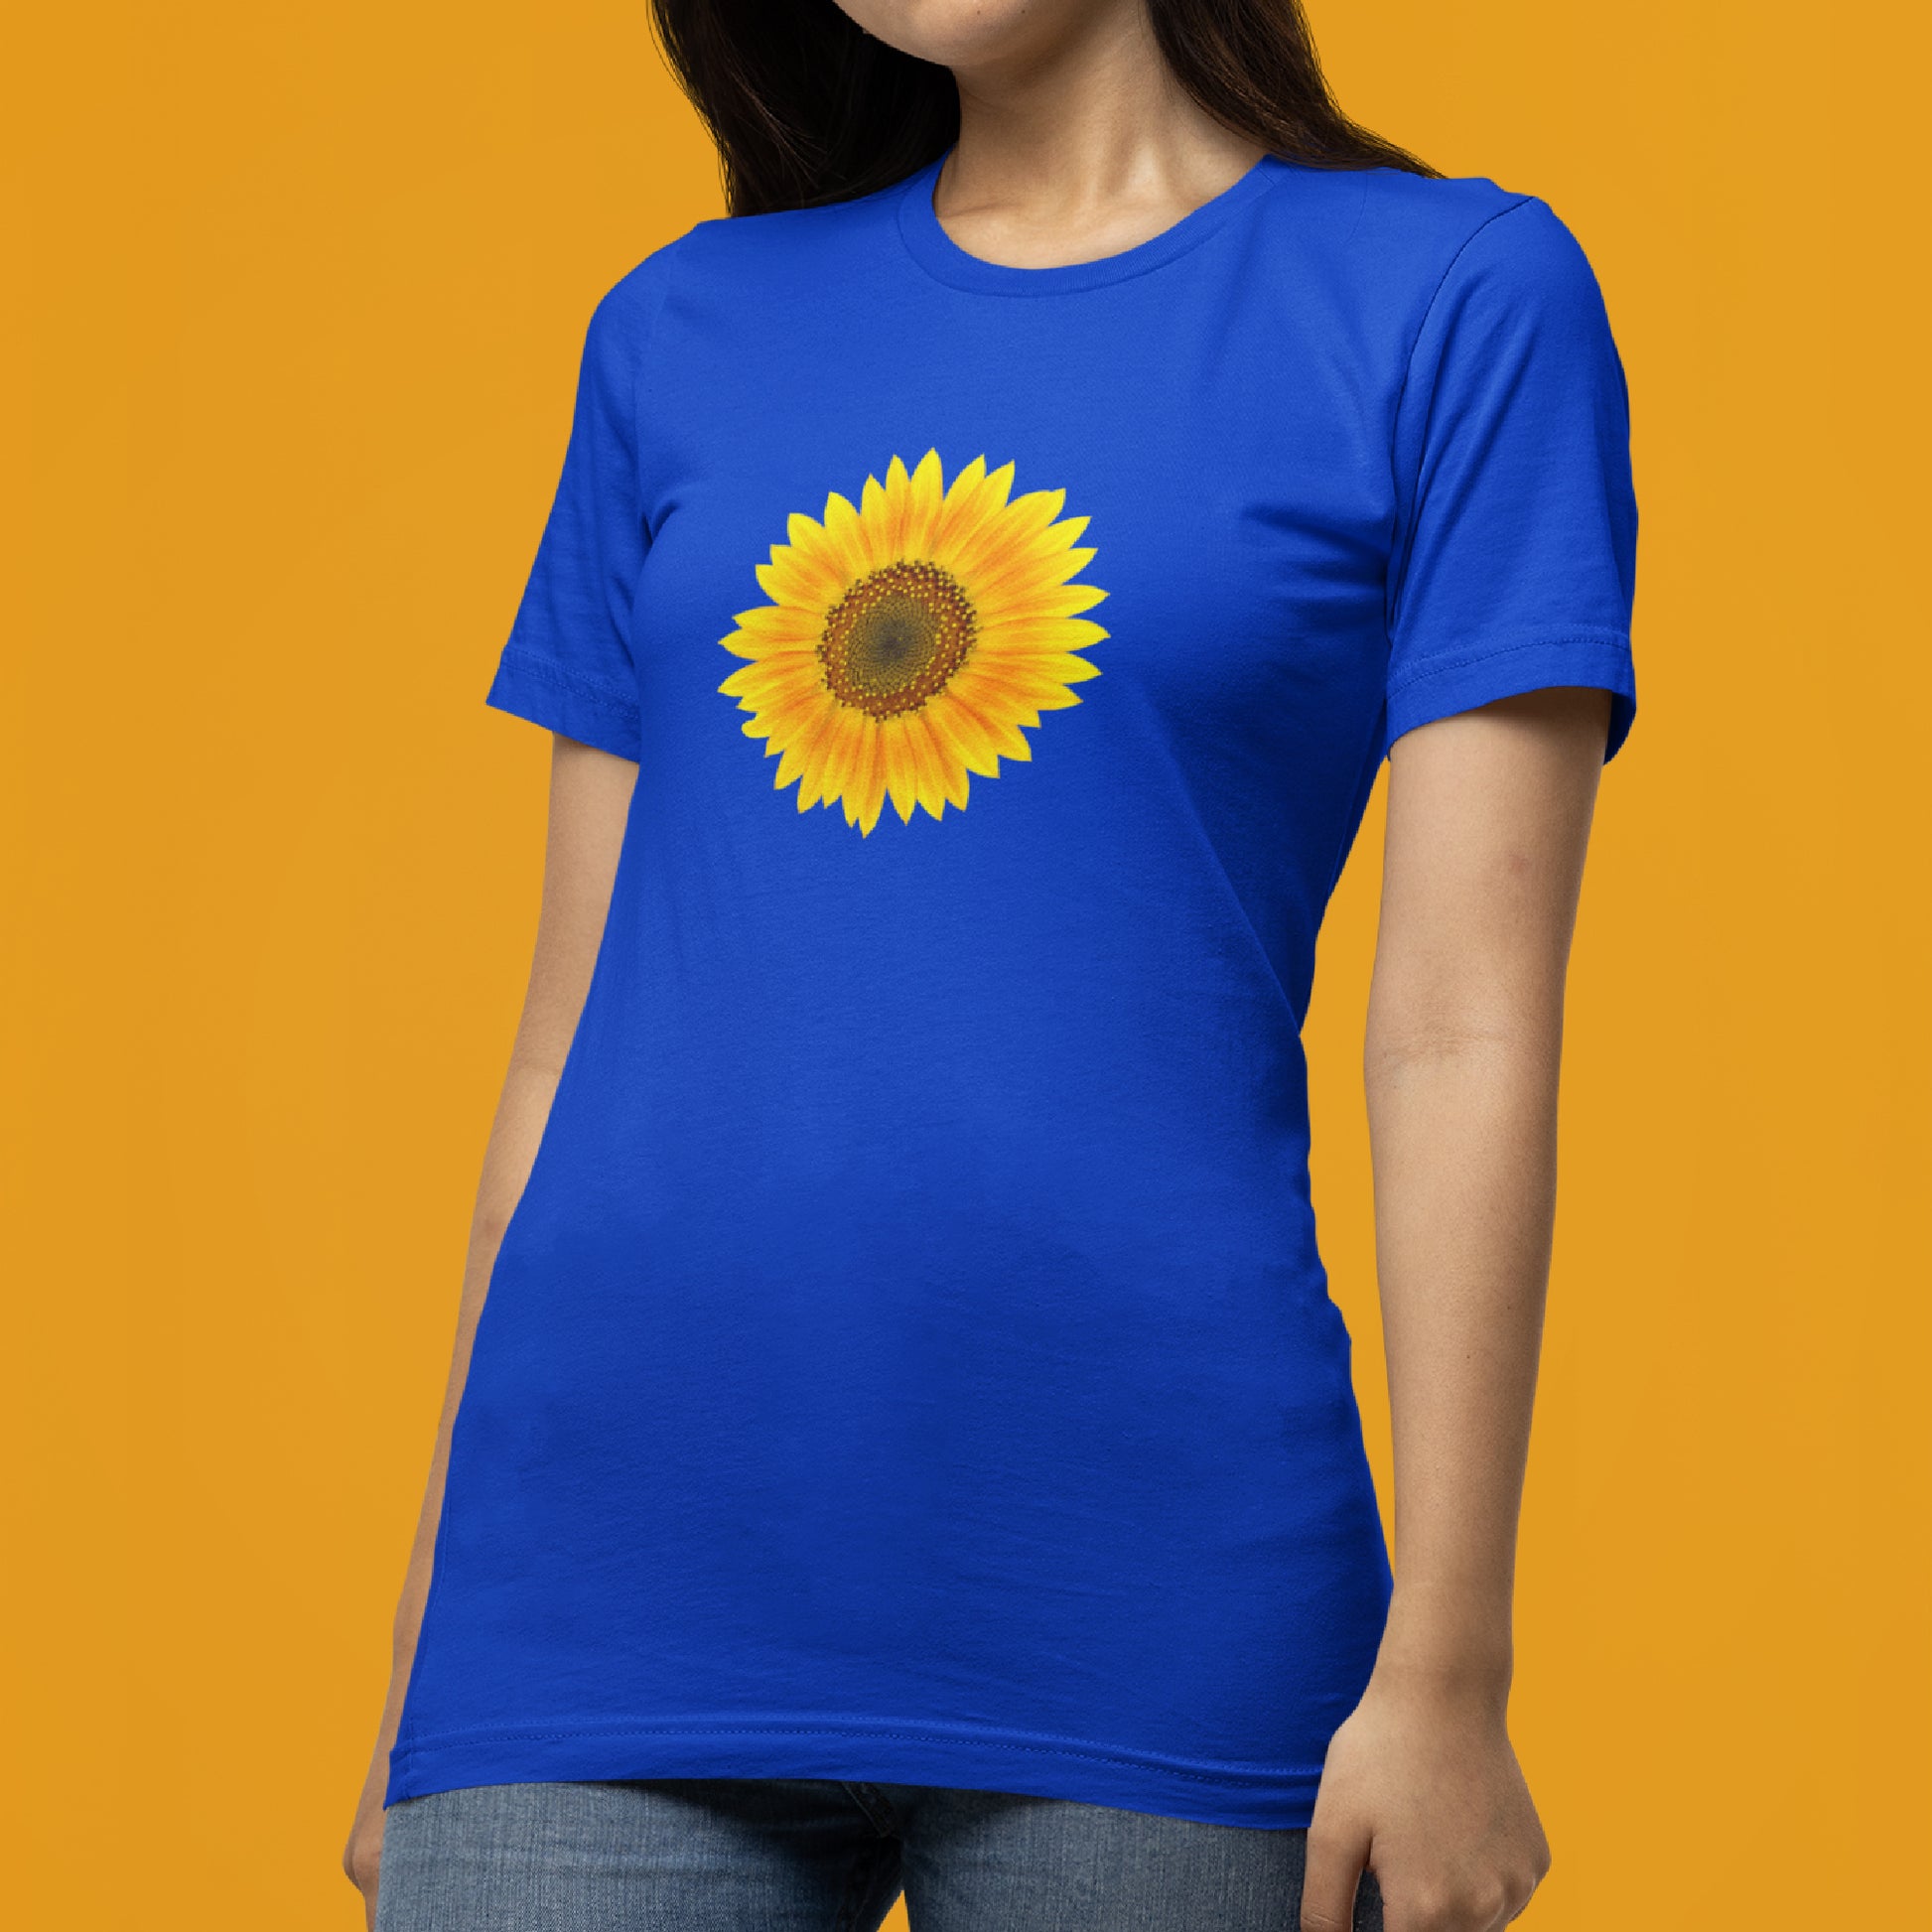 Mock up of a woman wearing our True Royal slim-fit t-shirt